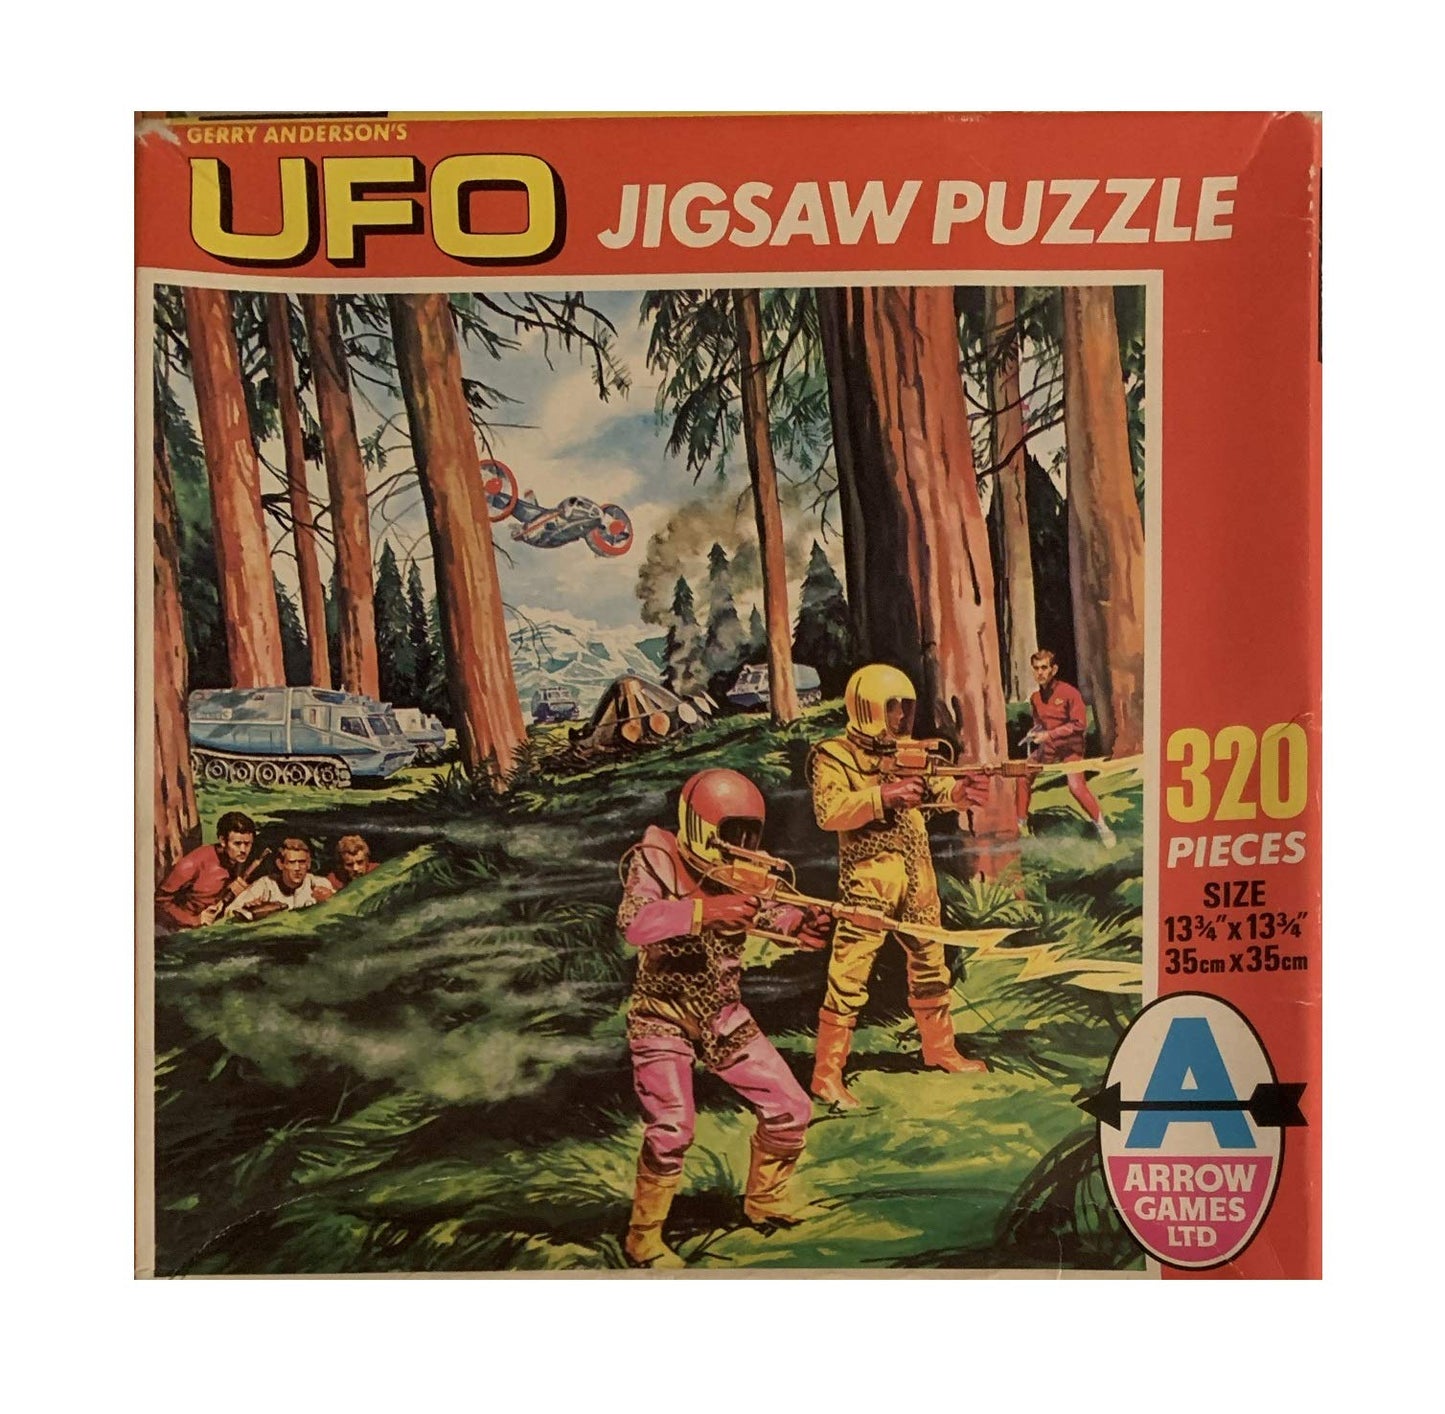 Vintage Gerry Andersons Arrow Games Ltd 1970 UFO 320 Piece Jigsaw Puzzle No. 2316 The Aliens Last Stand - Complete And In The Original Box